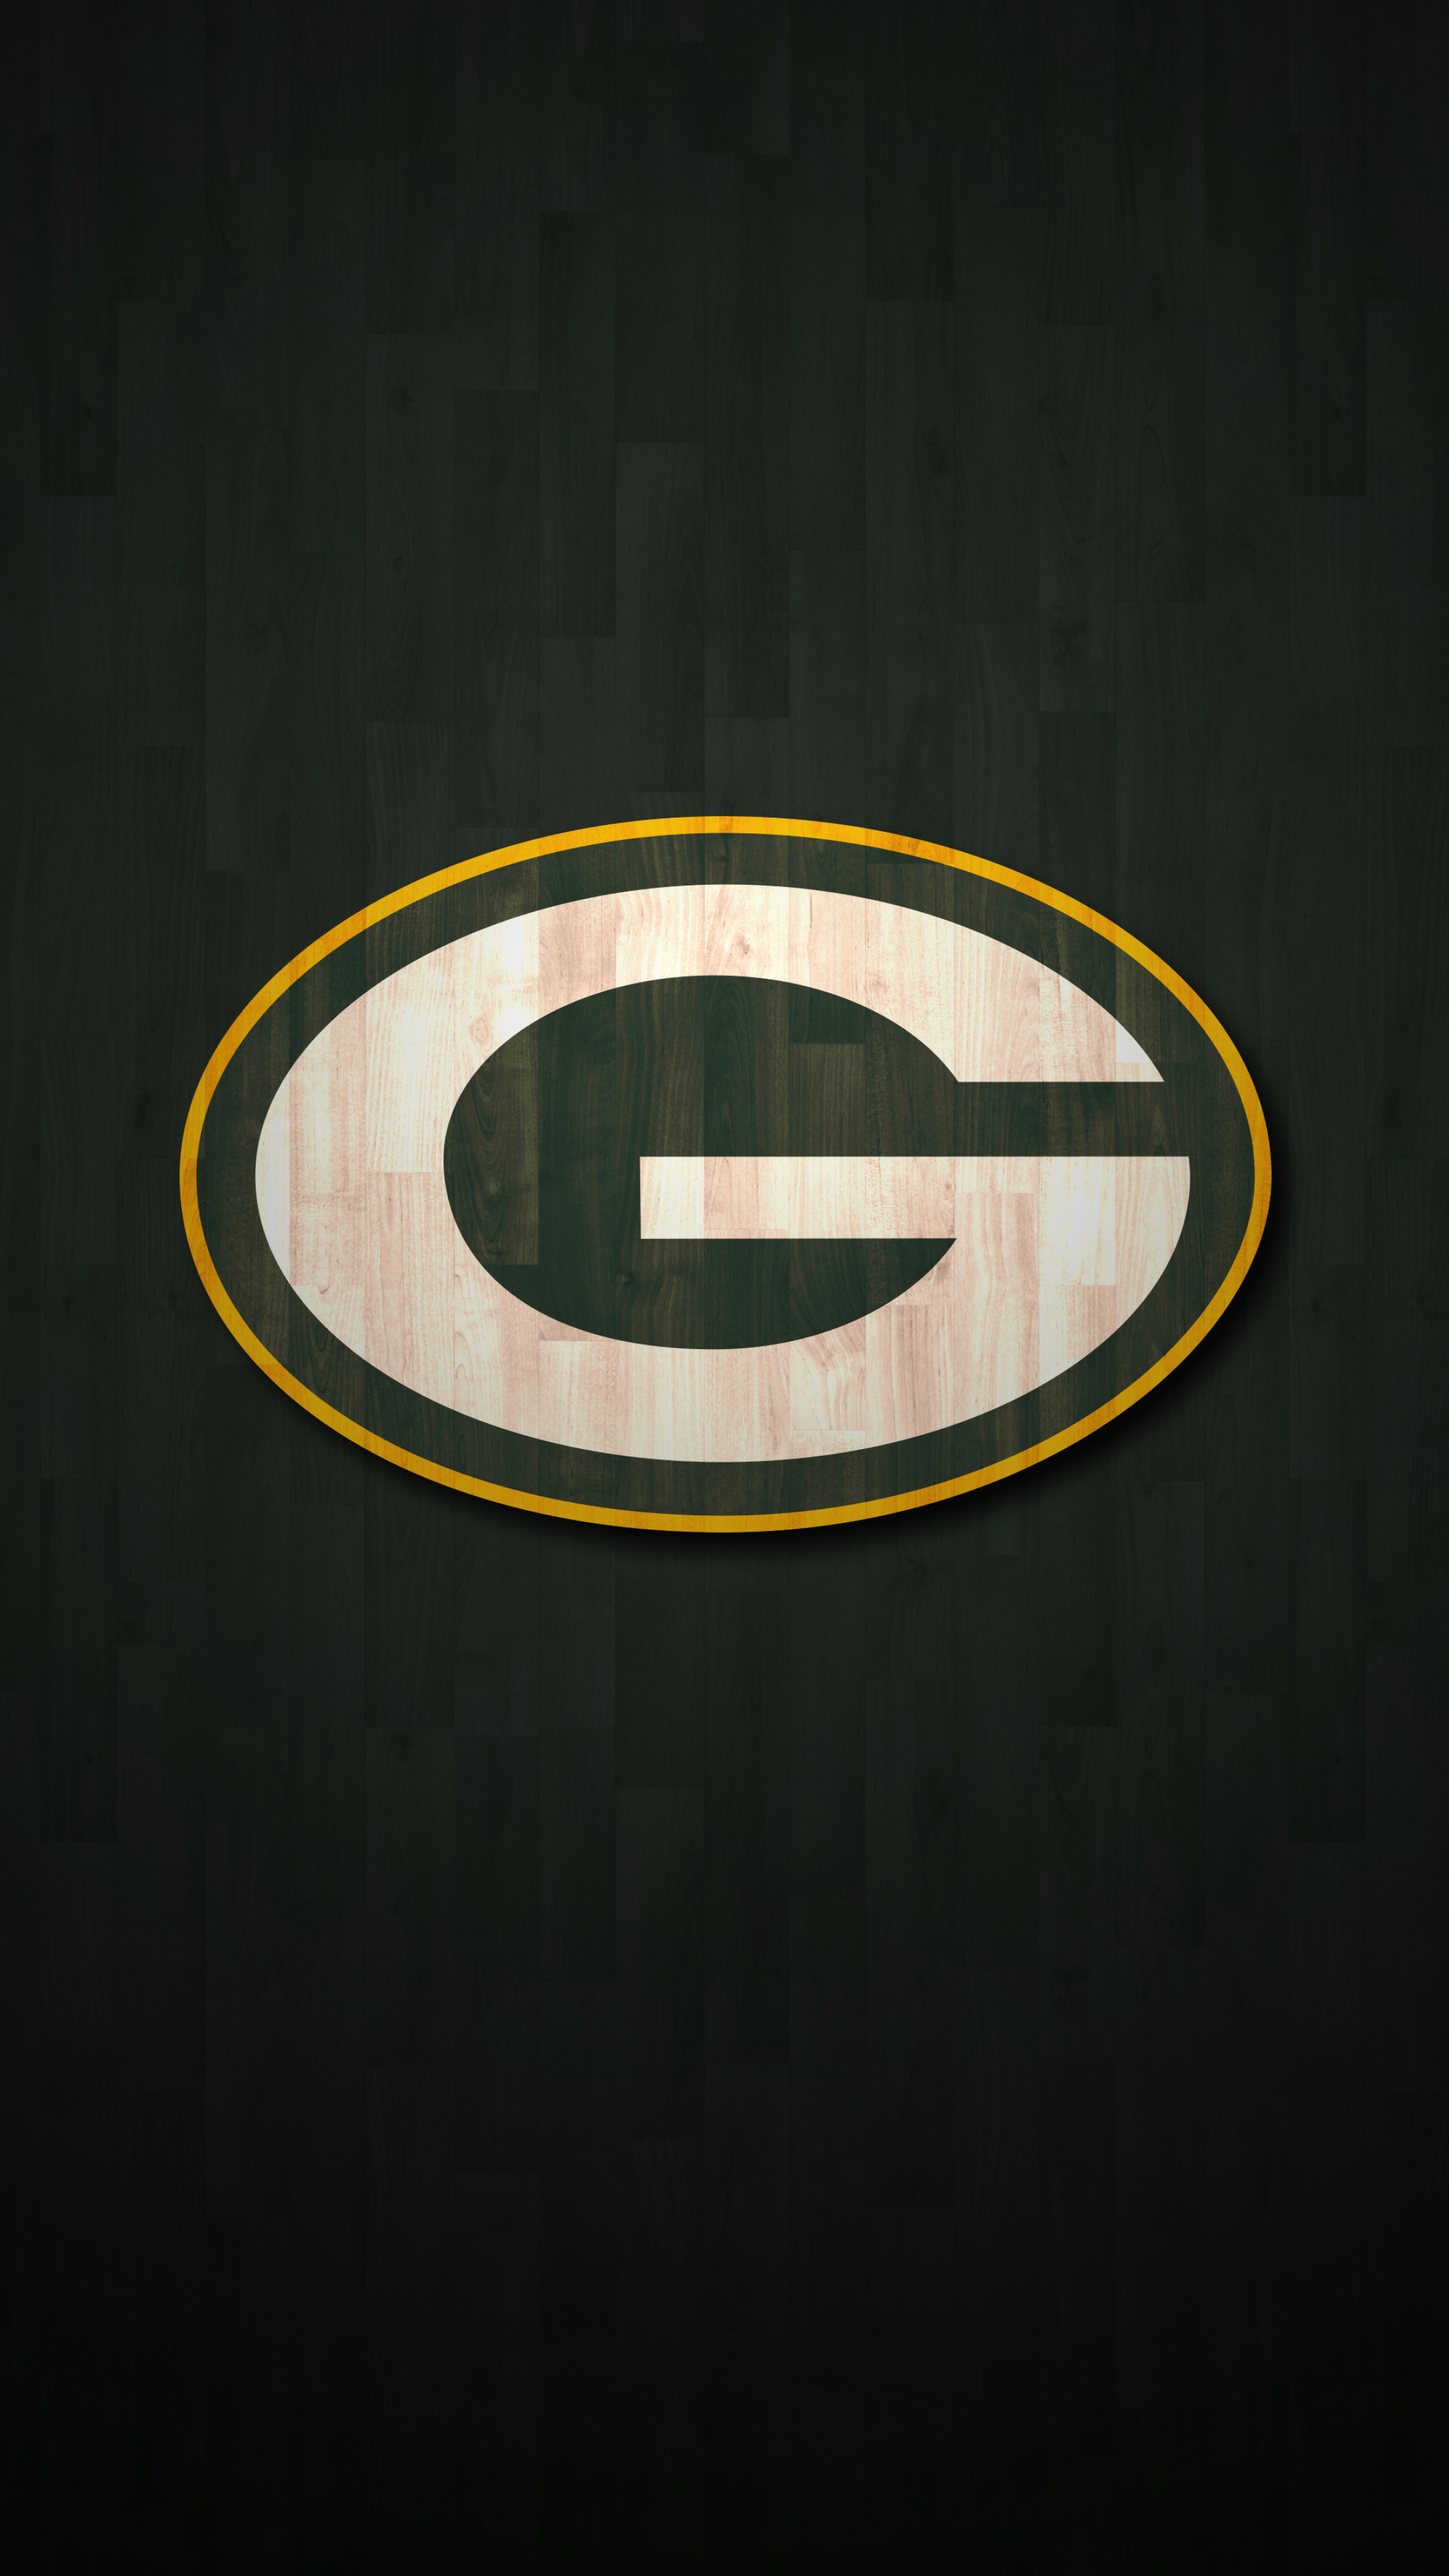 Green Bay Packers: A professional American football team based in Green Bay, Wisconsin. 2160x3840 4K Wallpaper.